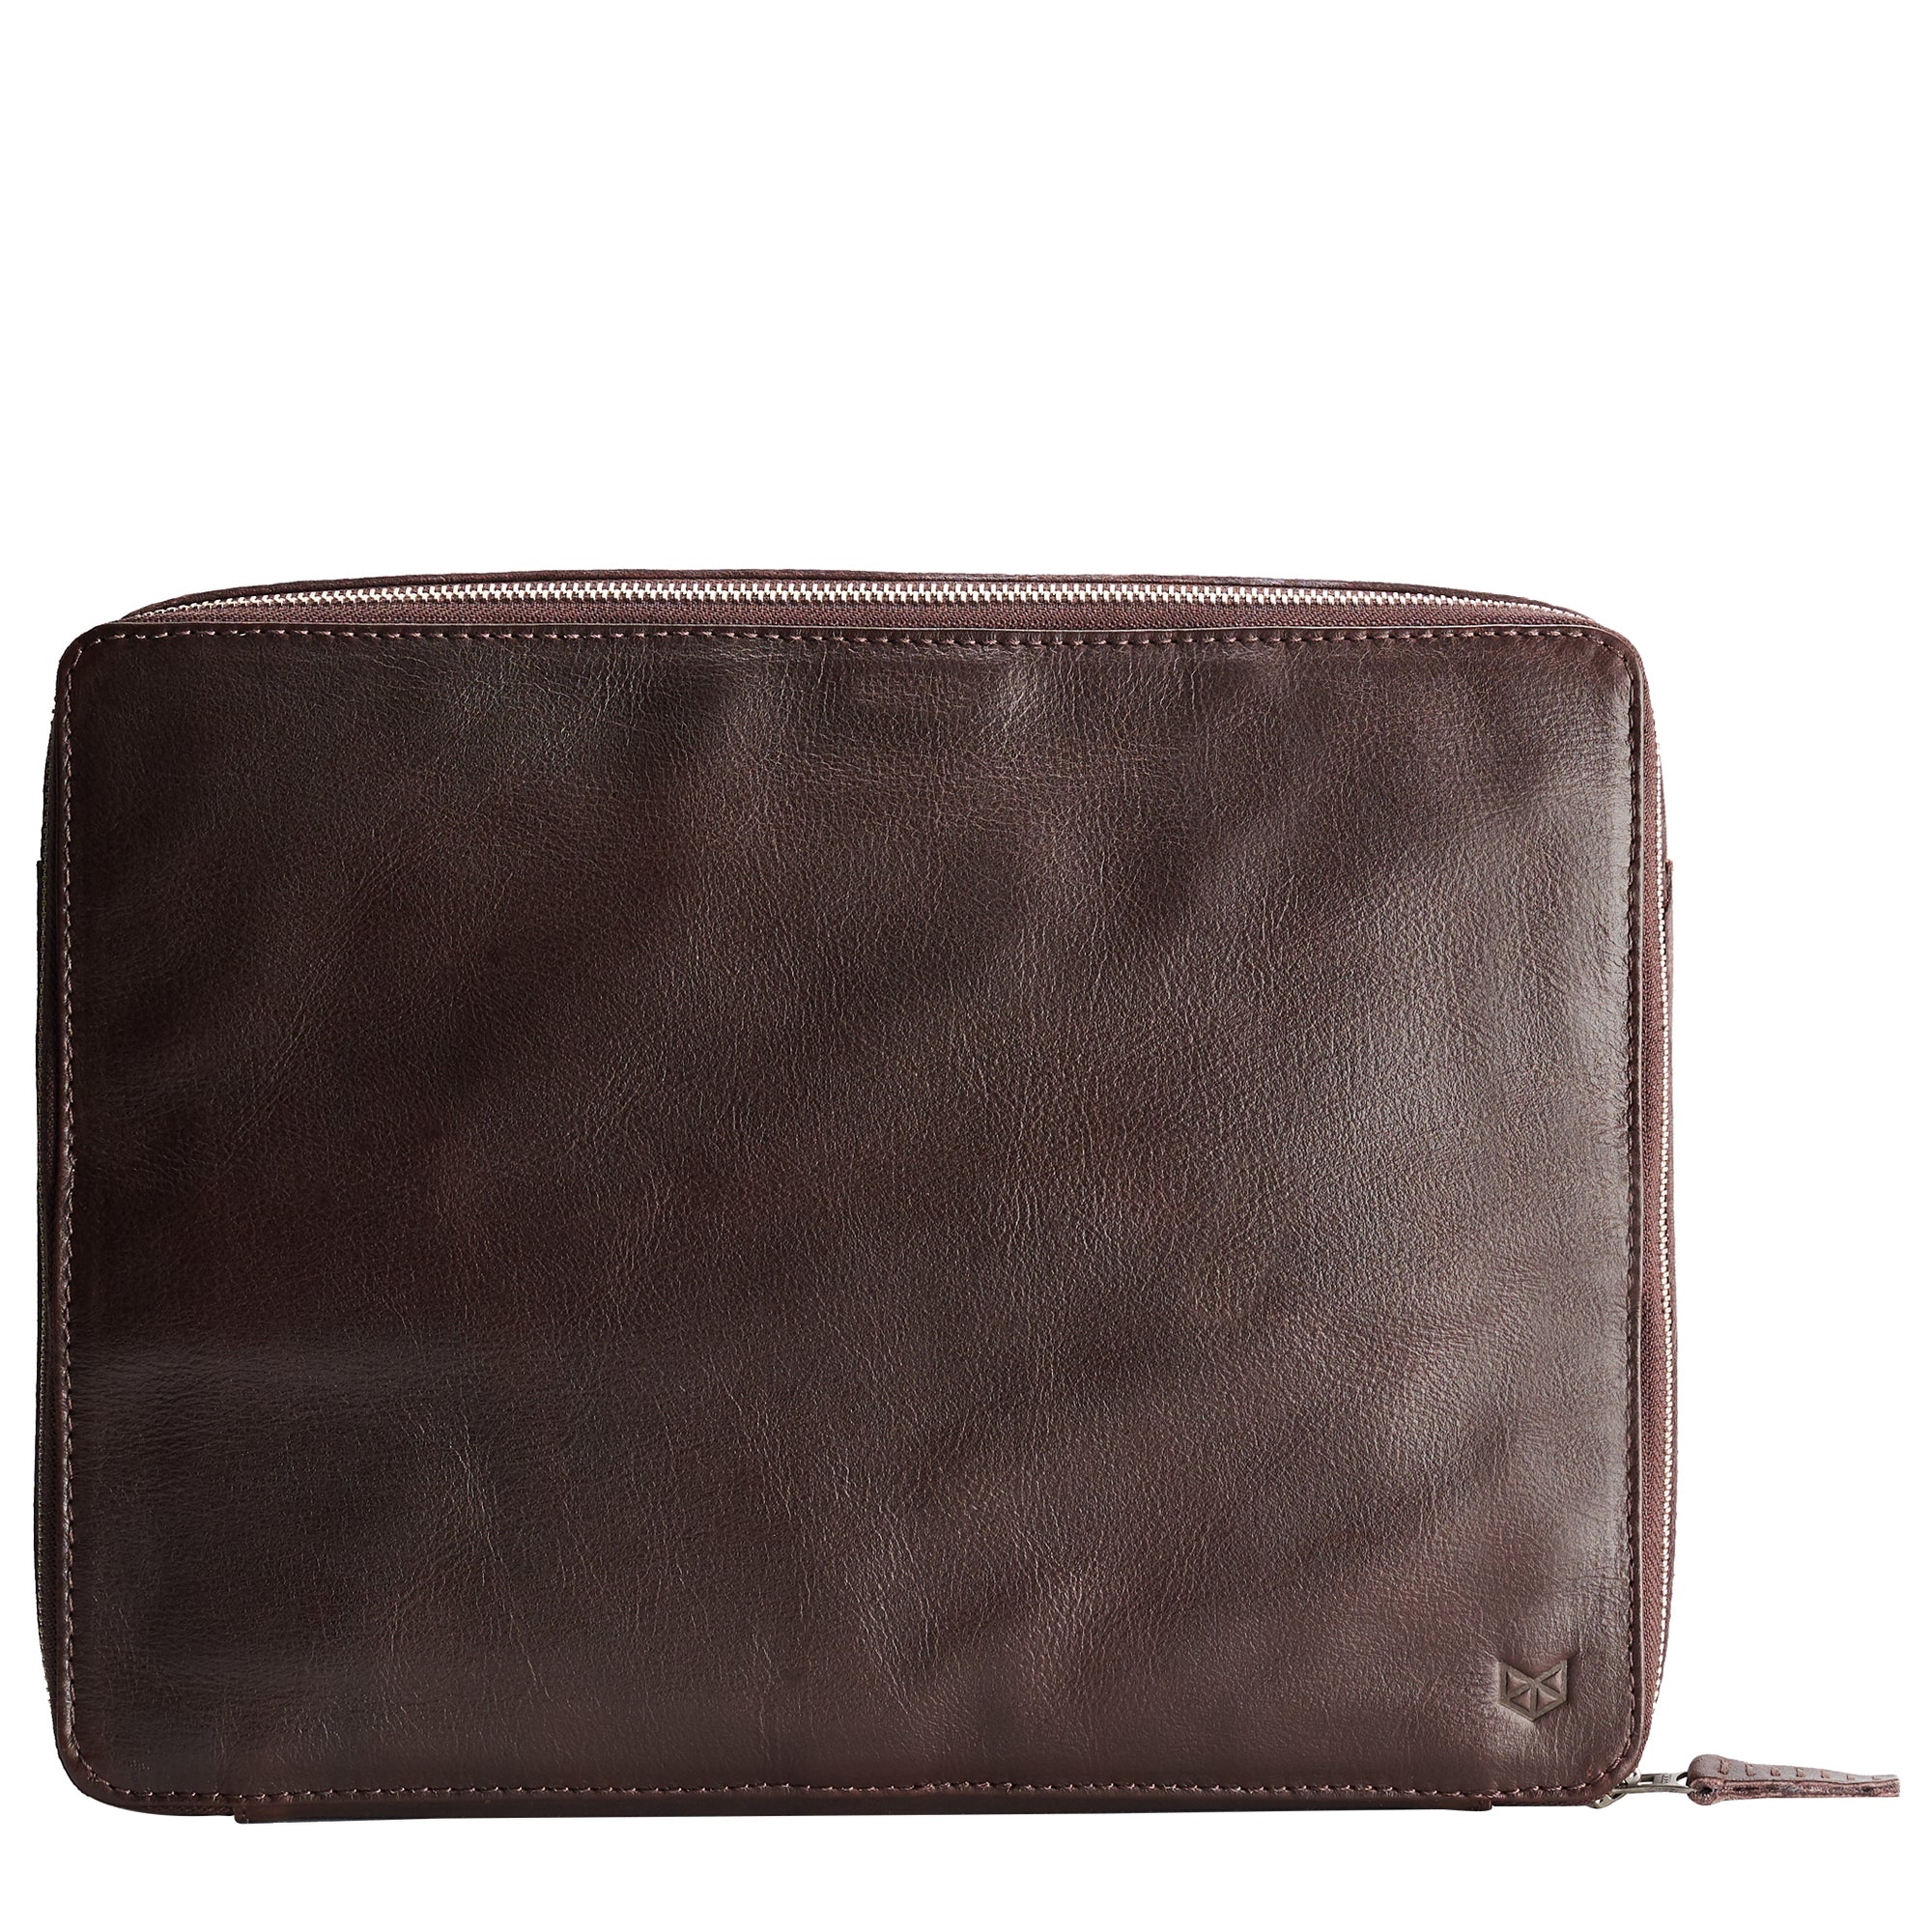 Handmade gadget pouch. Dark Brown electronic organizer by Capra Leather